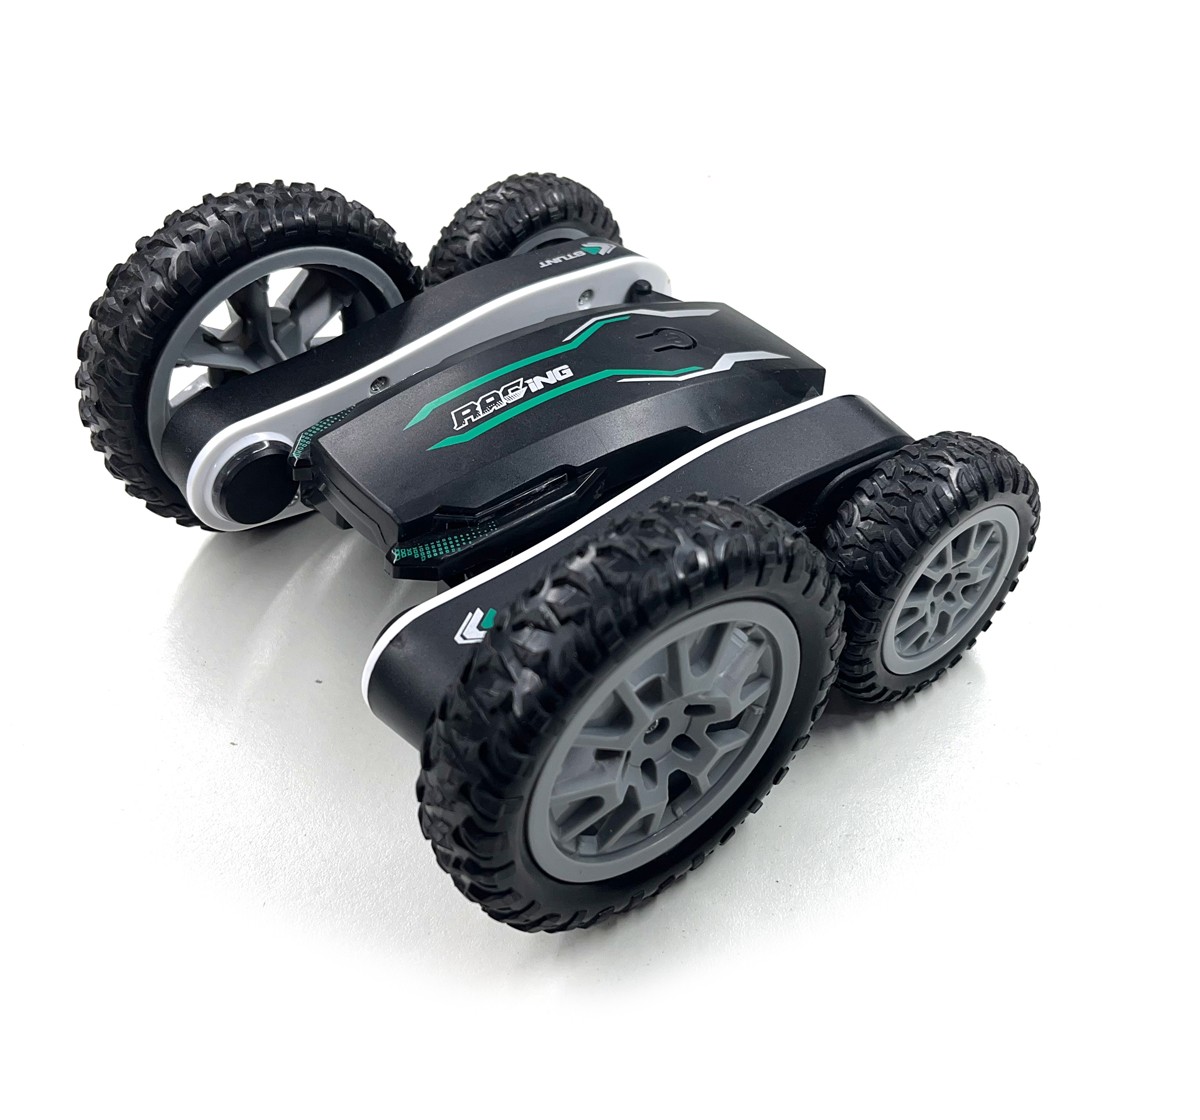 Ralleyz 2.4G 2 In1 Remote Control Stunt Car, Changeable Wheels With Charger, Black, 6Y+